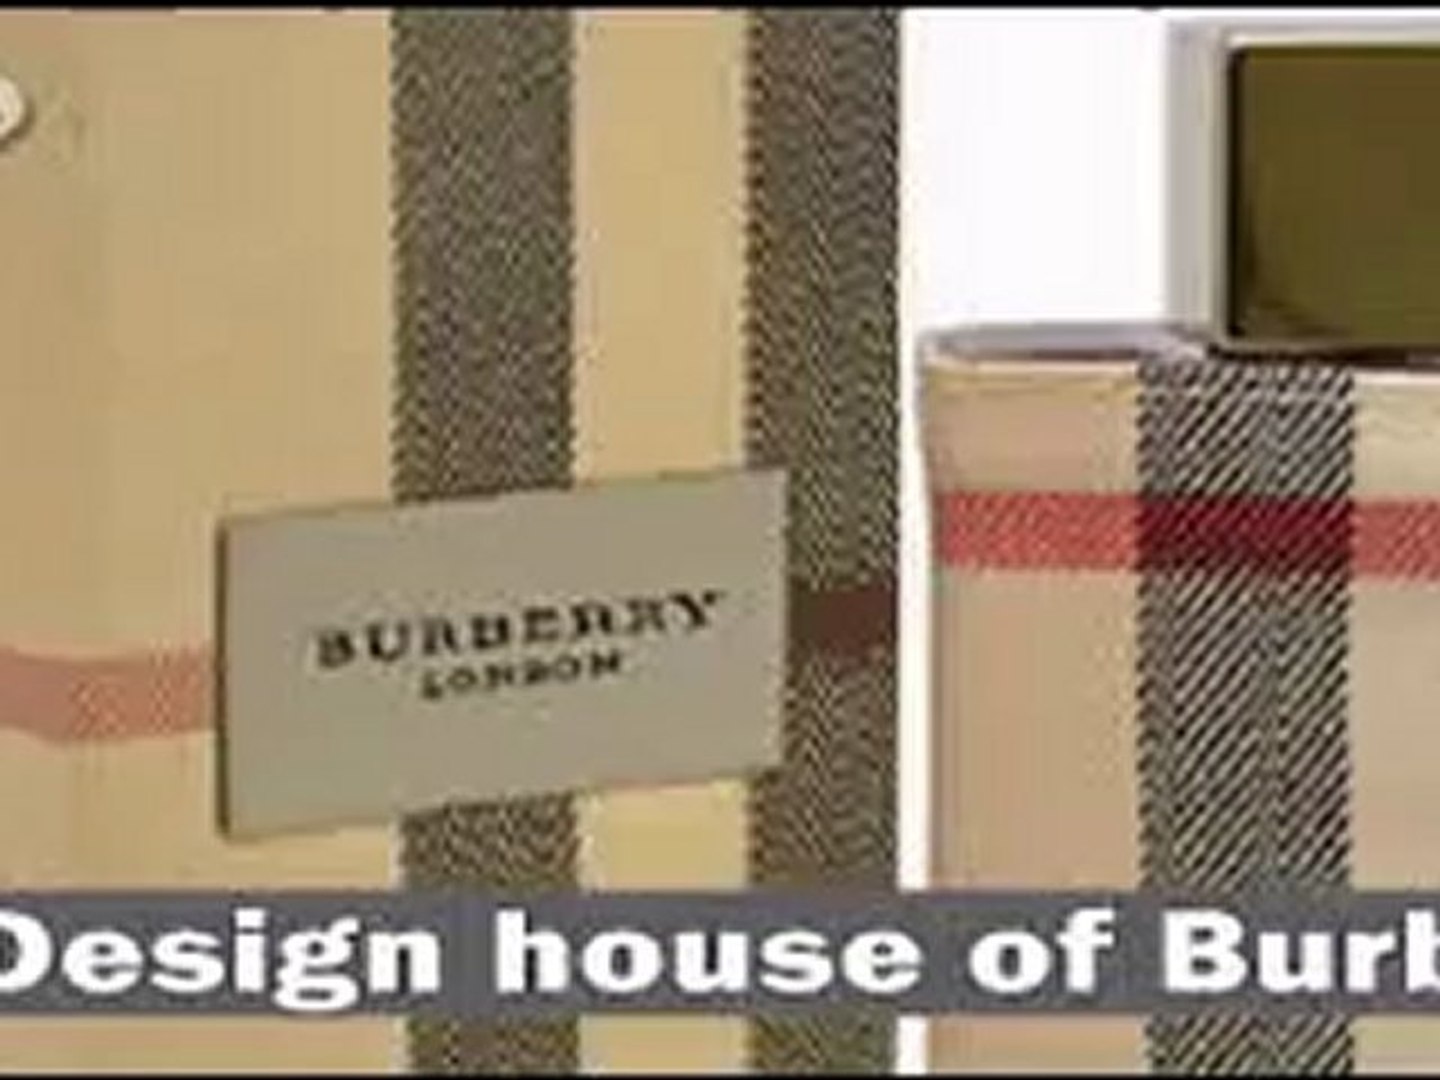 Burberry London for Men by Burberry of London